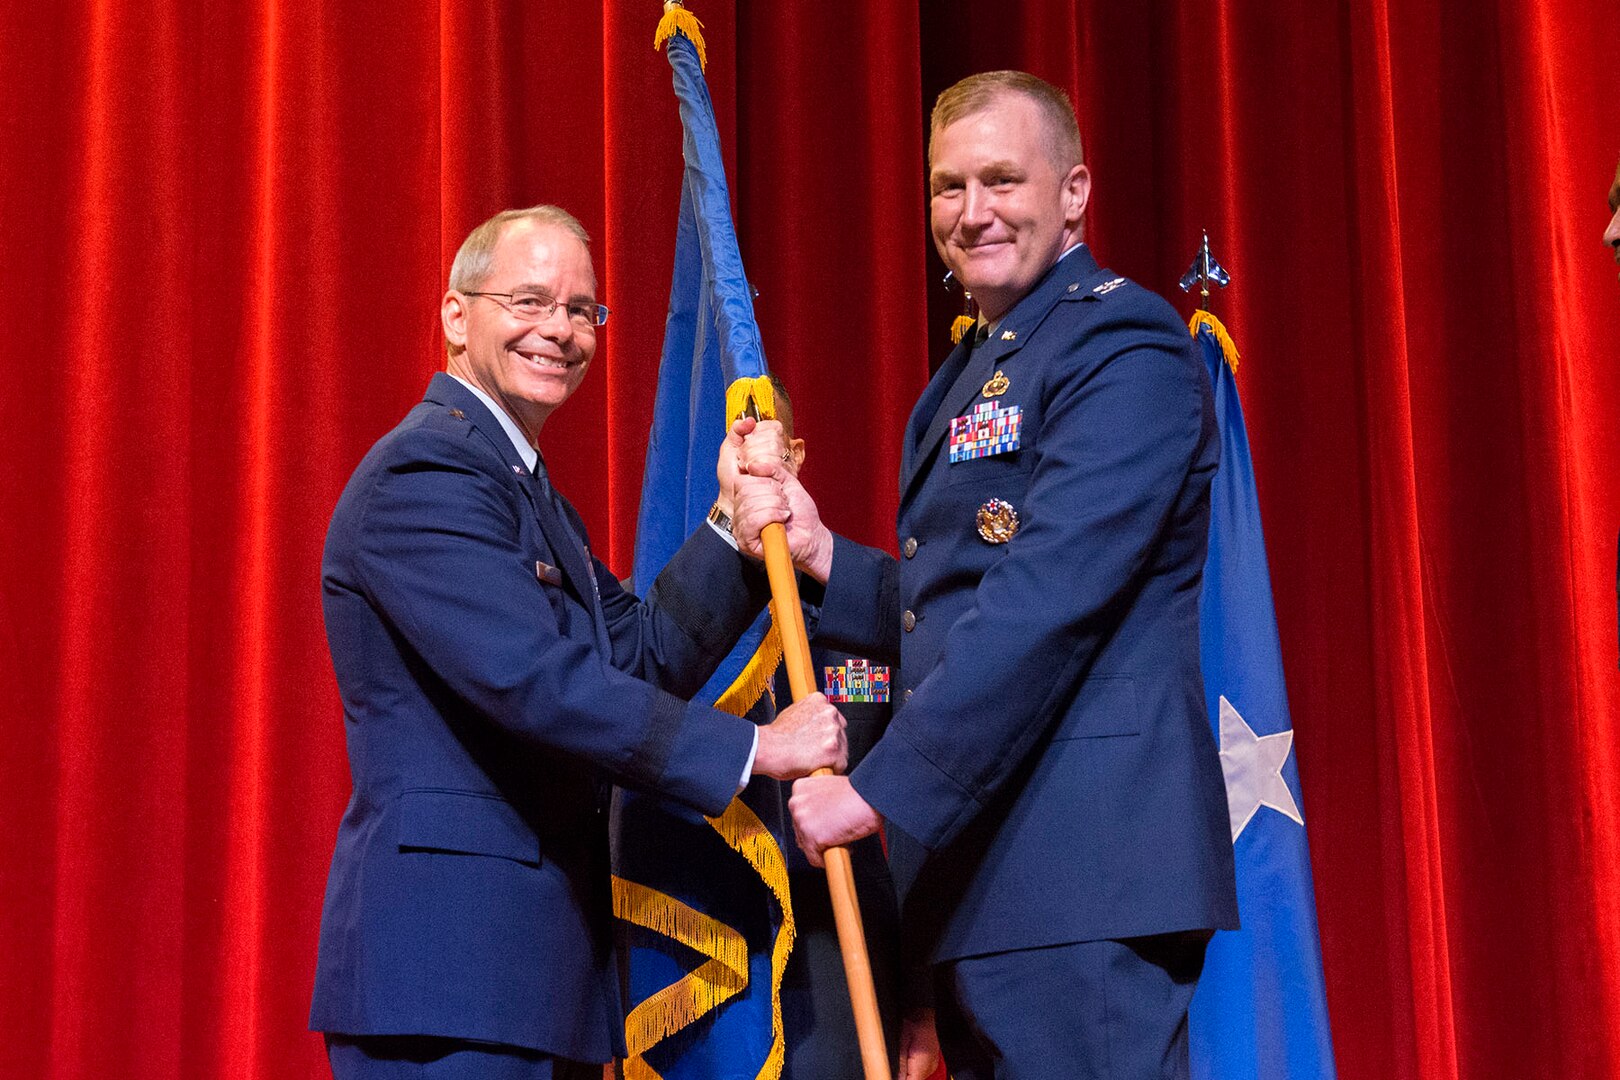 Col. Jonathan Wright accepts the guidon and command of the 502nd Installation Support Group from Brig. Gen. Bob LaBrutta, 502nd Air Base Wing and Joint Base San Antonio commander, during a change of command ceremony June 6, 2016 at the Bob Hope Theatre at JBSA-Lackland. Wright was previously the 502nd Contracting Squadron commander. 